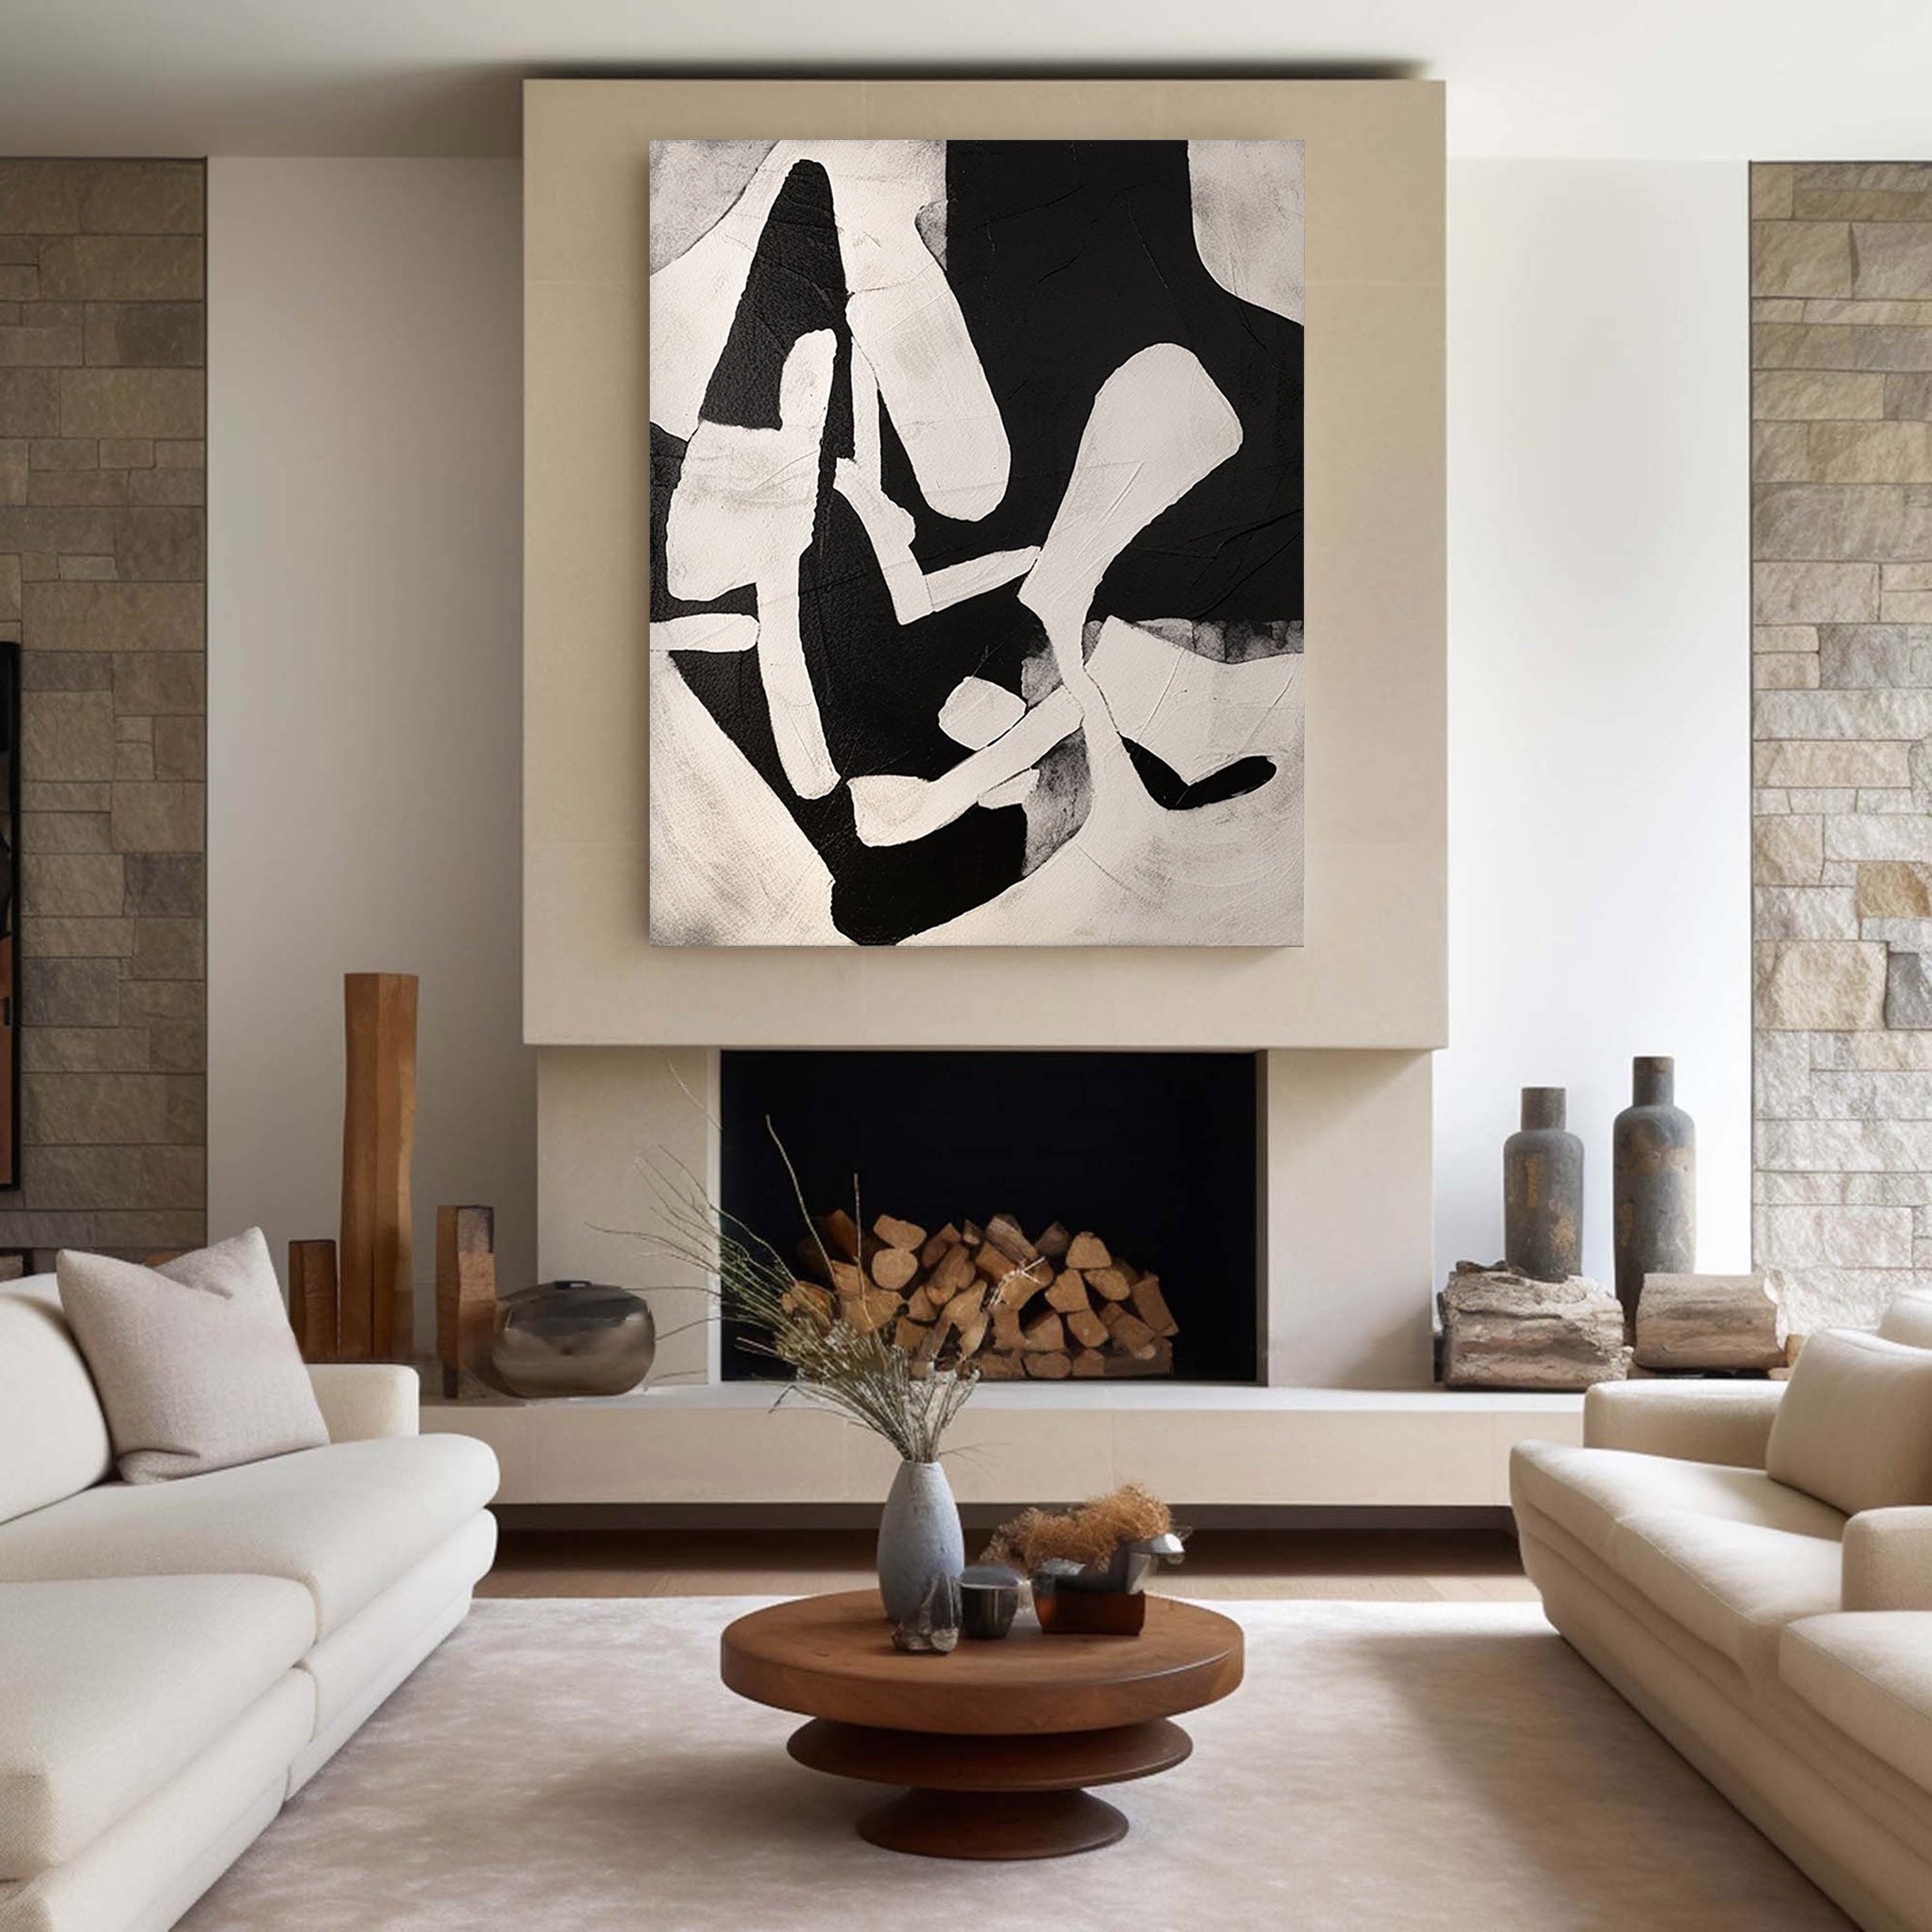 Black & White Abstract Painting #BWA 005